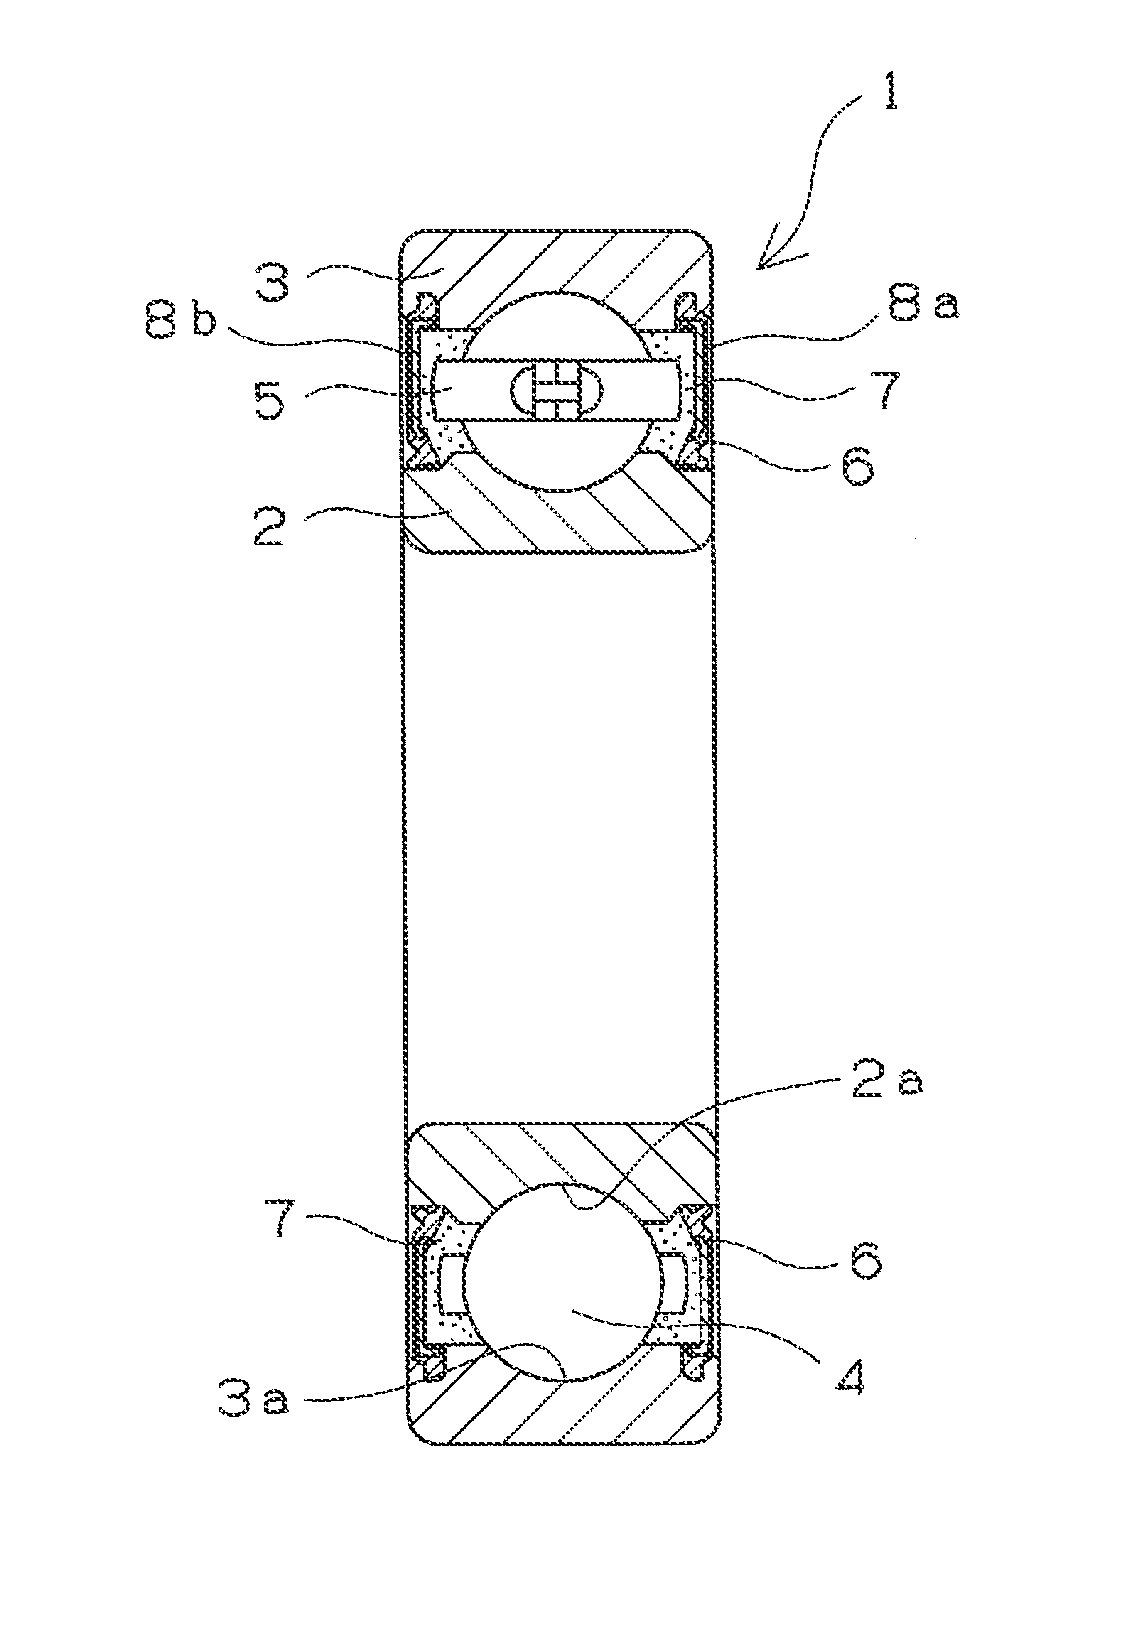 Grease composition and rolling bearing